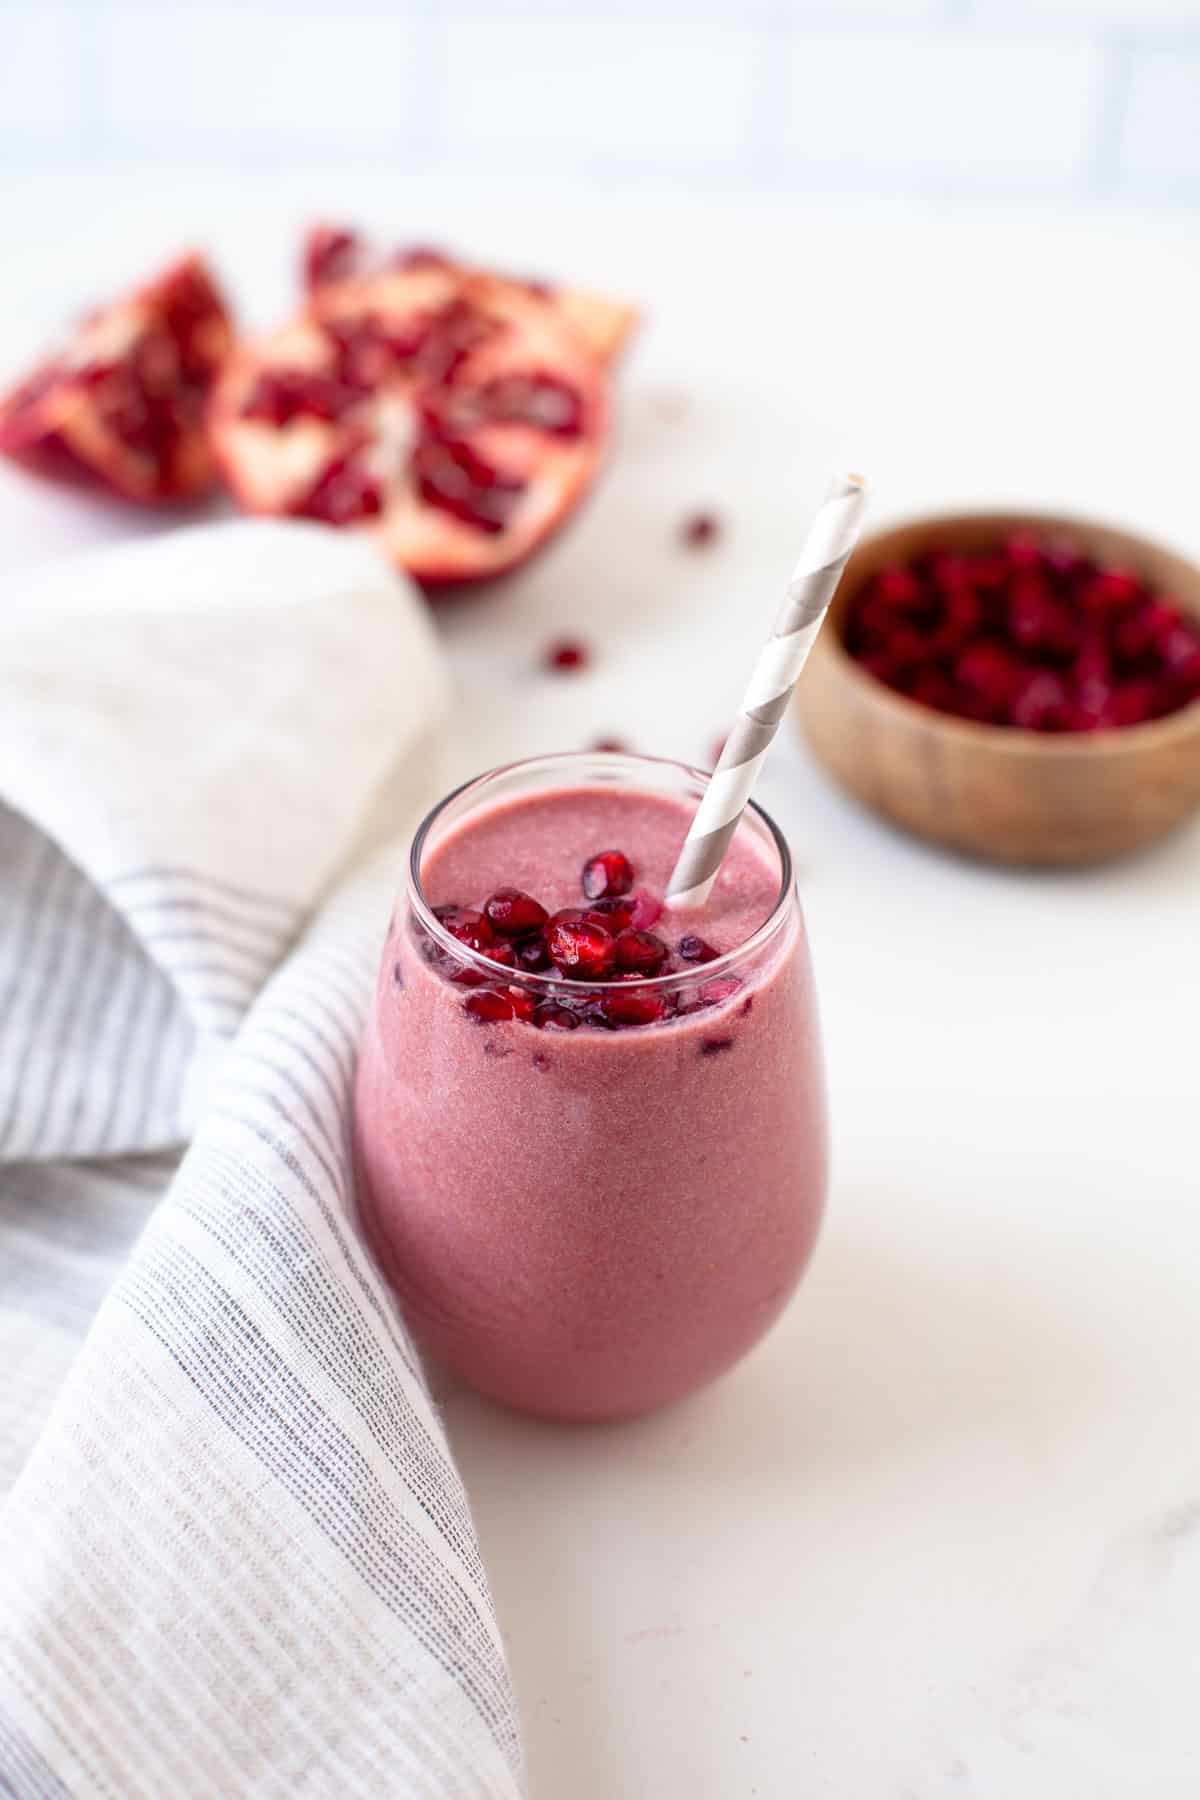 Pink smoothie in a glass with pomegranate seeds and a straw. A whole pomegranate and bowl of seeds in the background.